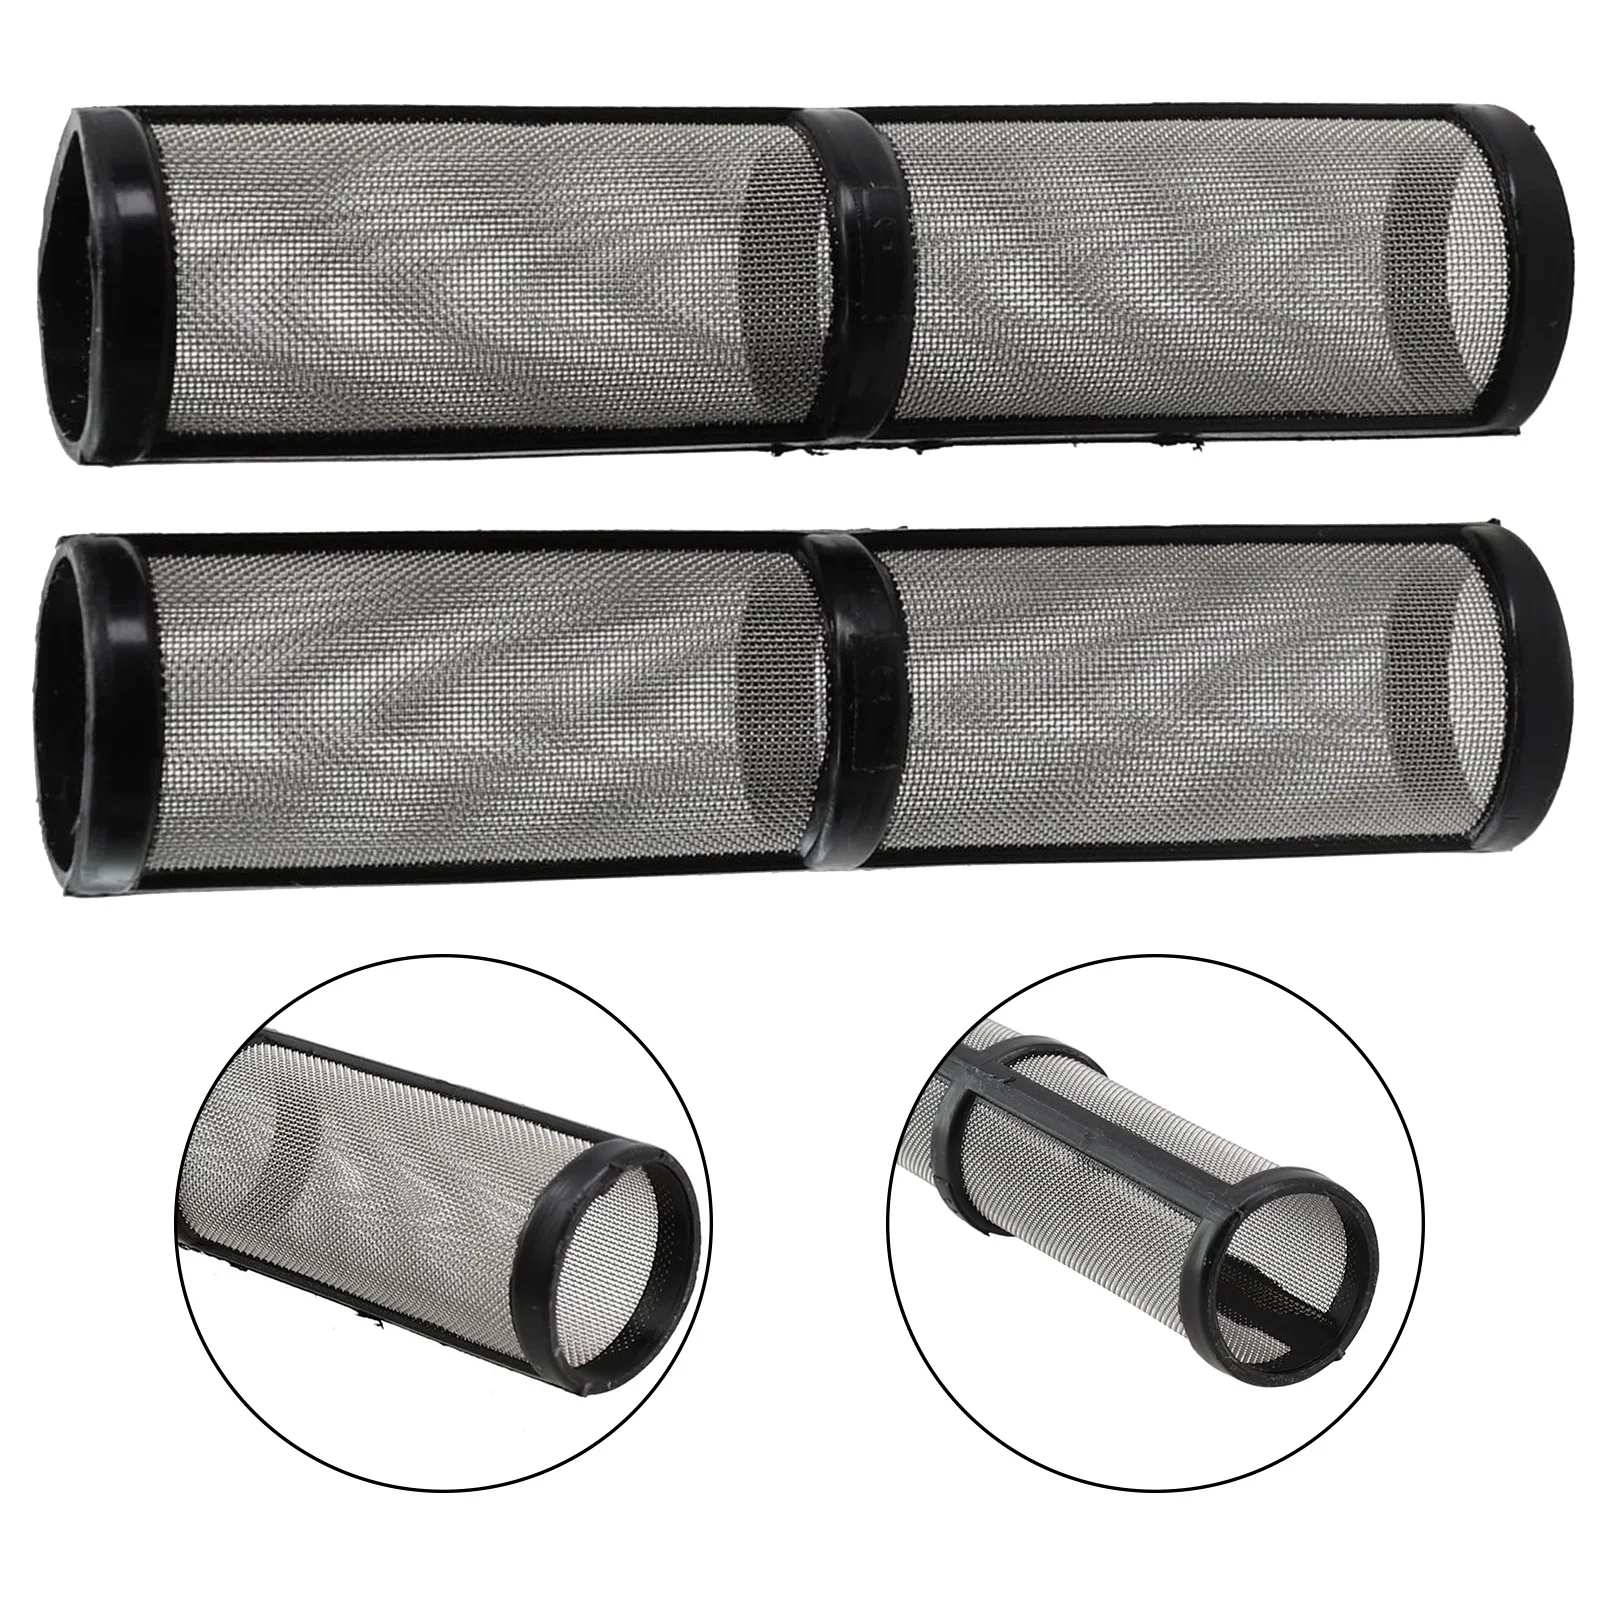 Efficiently Filter Coating Materials with 2pcs Mesh Airless Electric Paint Sprayer Filters for G390 G395 G495 G595 filter pump body coating stainless steel 2pcs 395 electric filter mesh airless paint sprayer black power tools